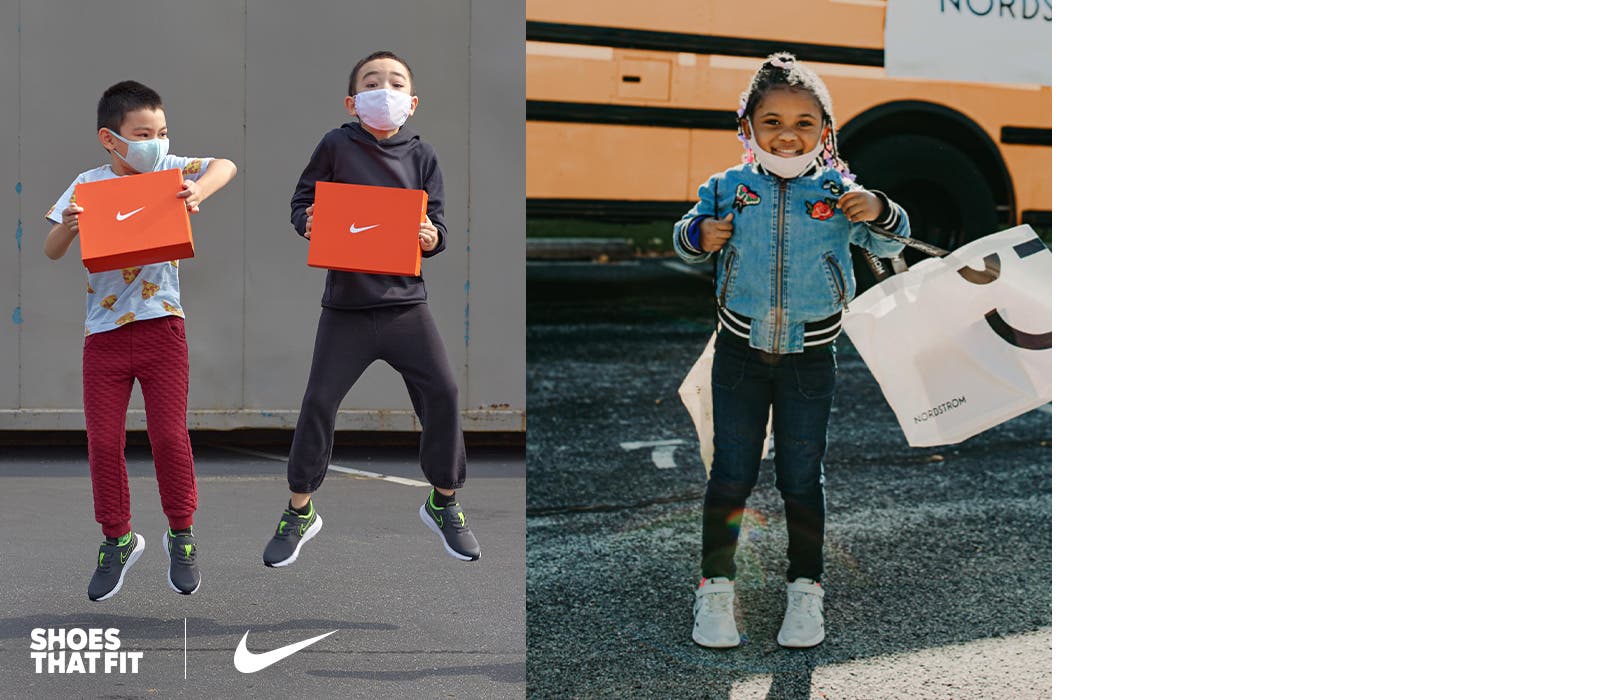 Kids with new shoes from Shoes That Fit, Nordstrom and Nike.